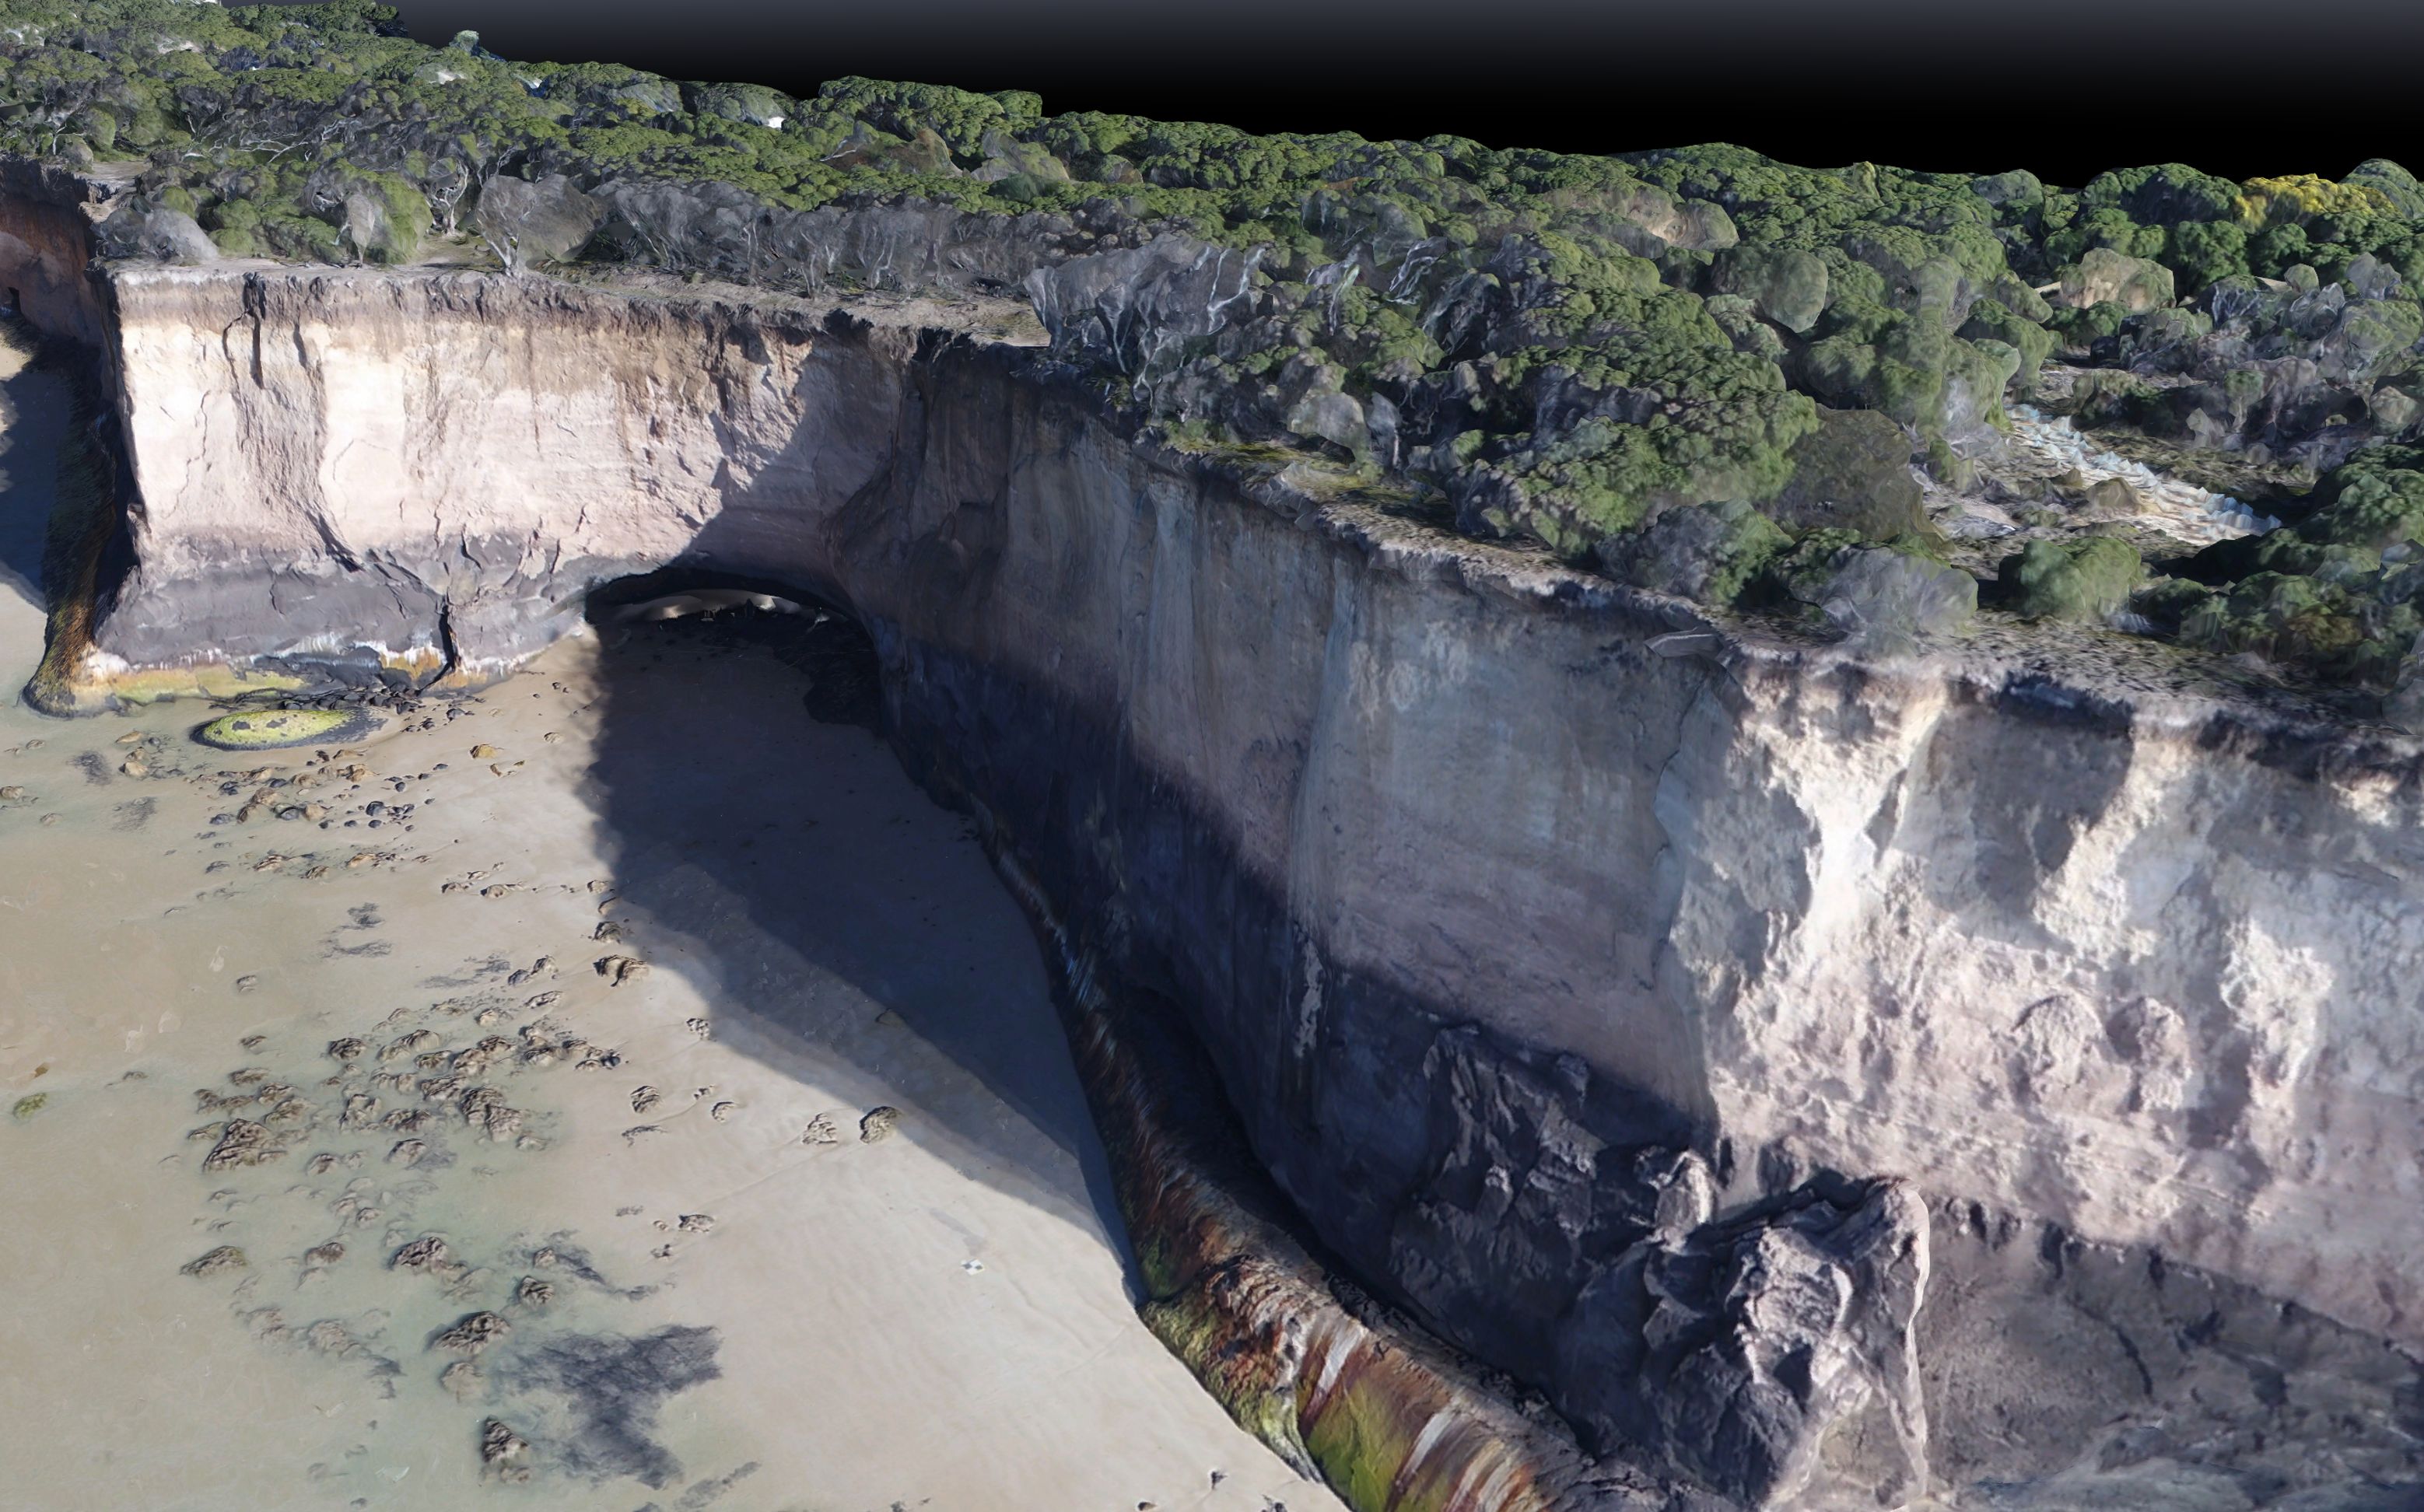 Orthomosaic image of cliff from Propeller Aero